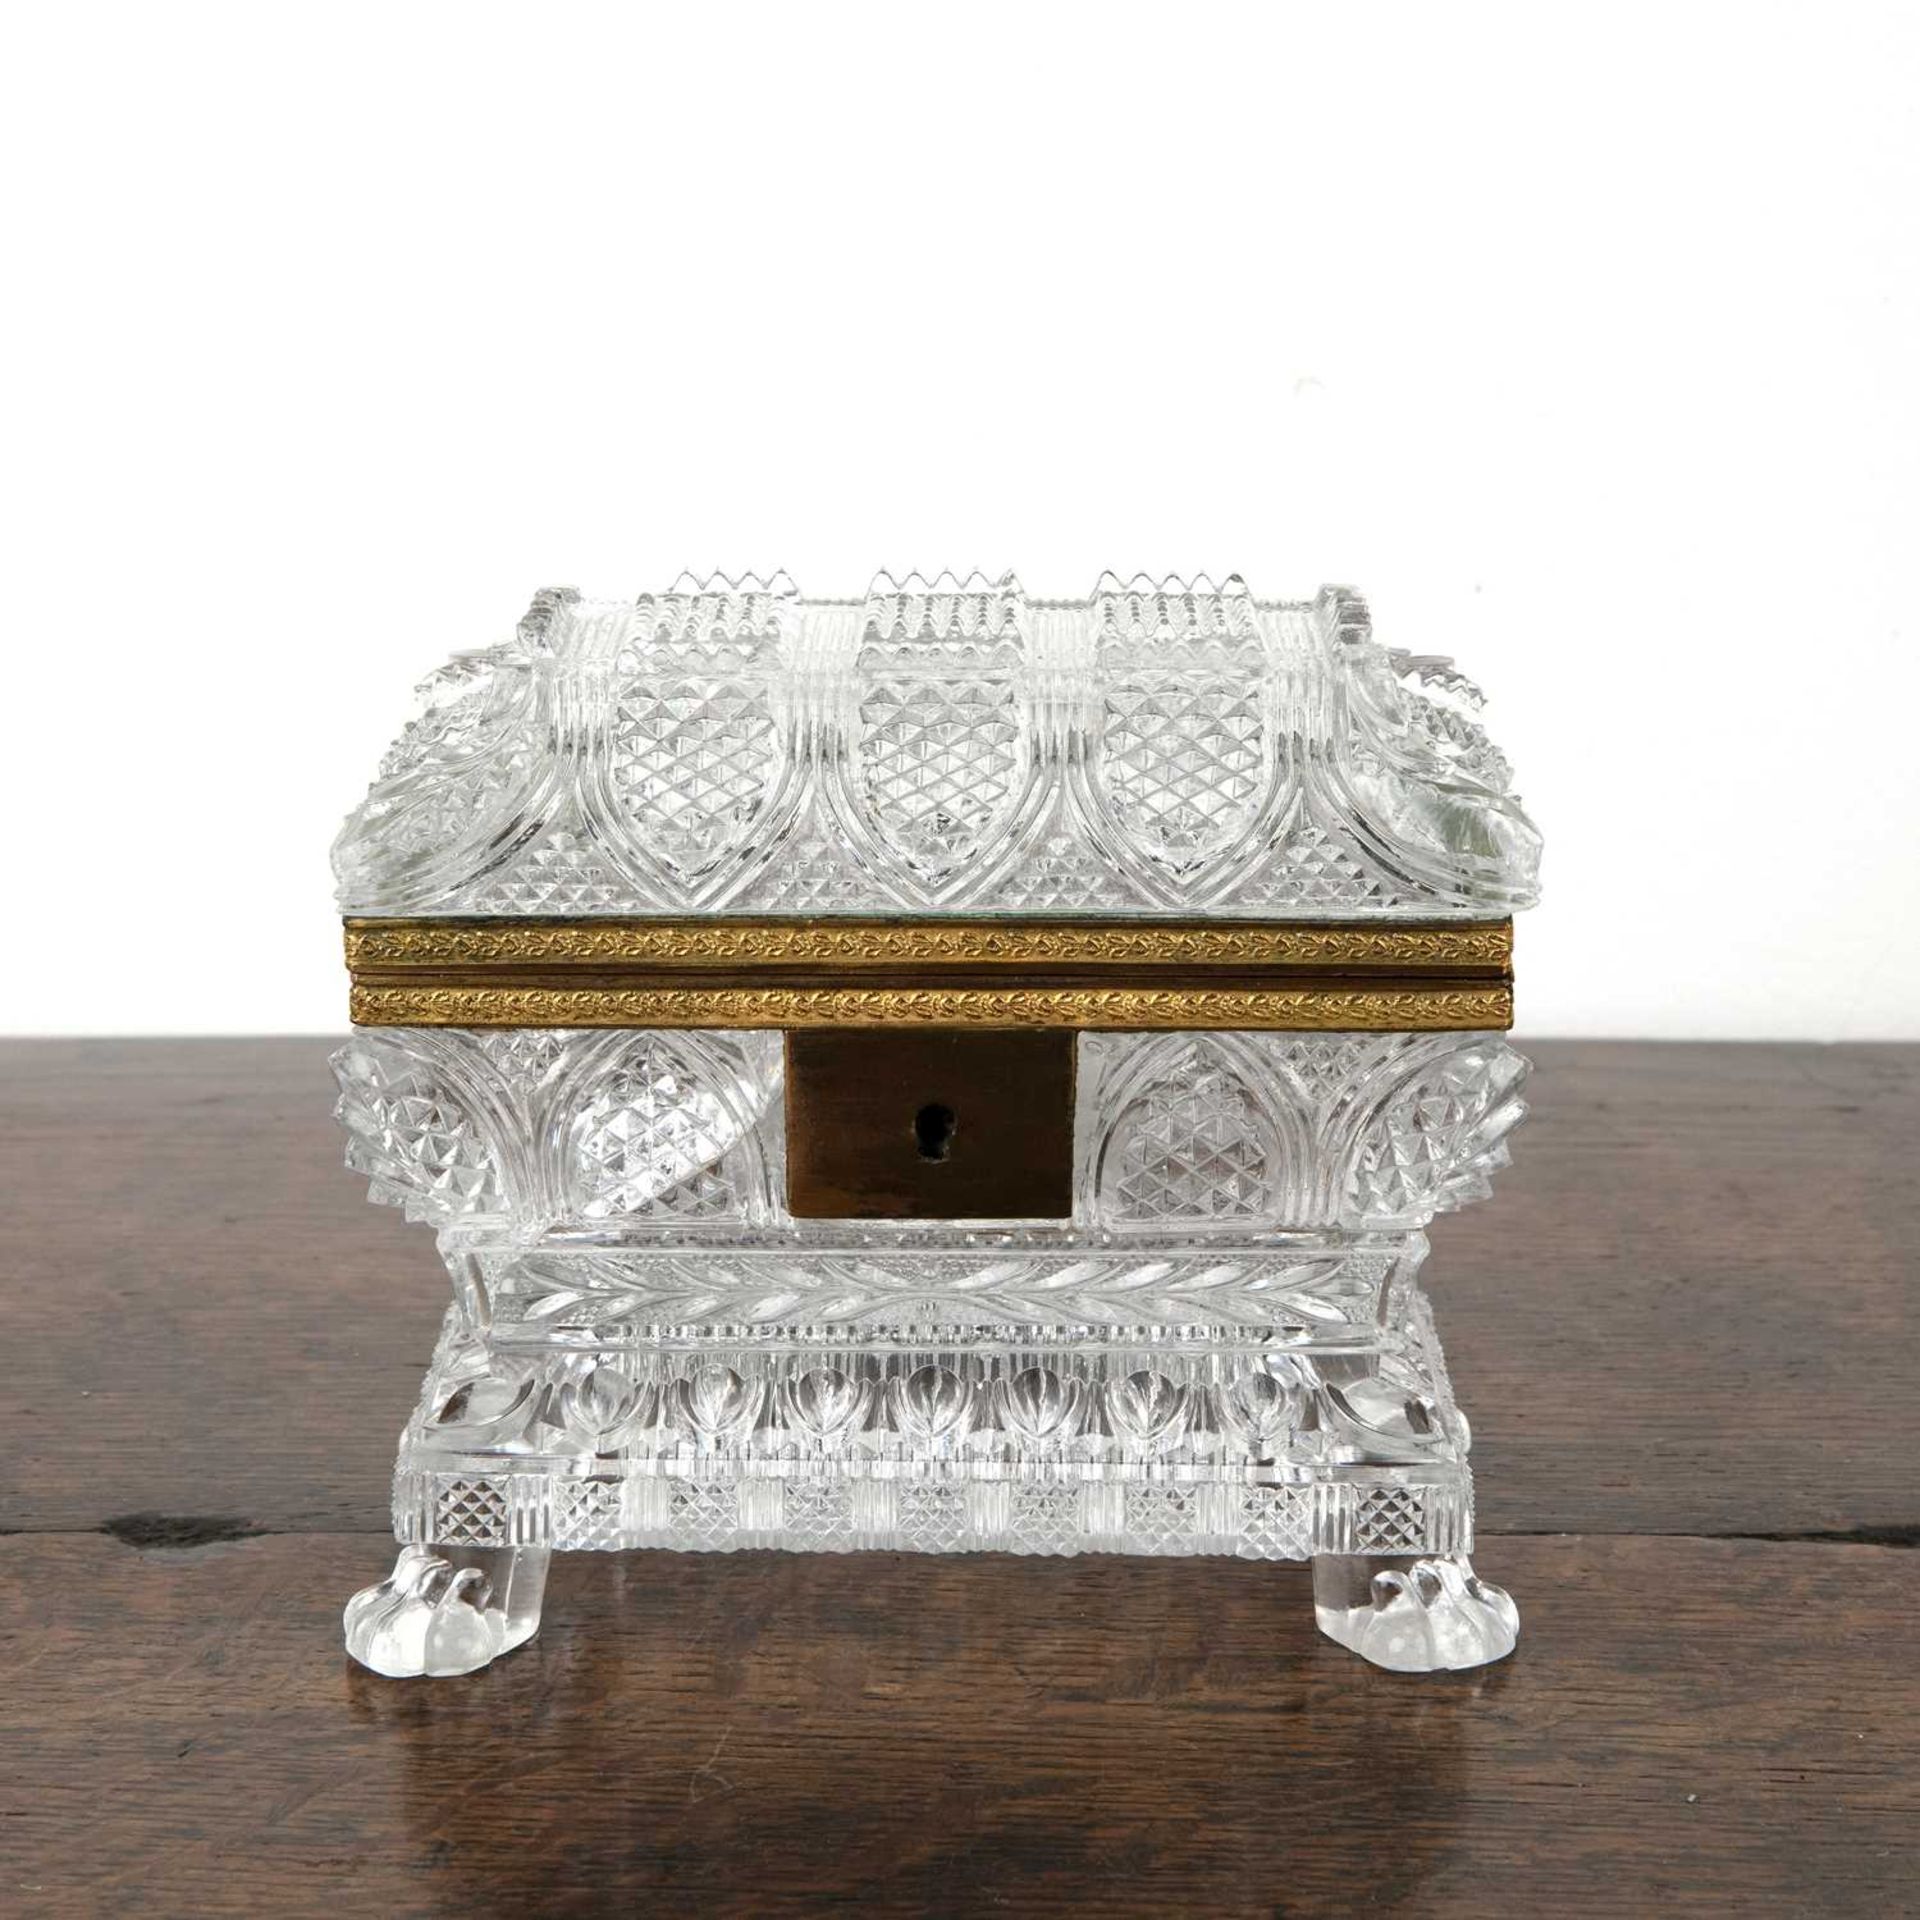 French Charles X style glass casket or coffin with gilt metal mounts on a pressed or moulded glass